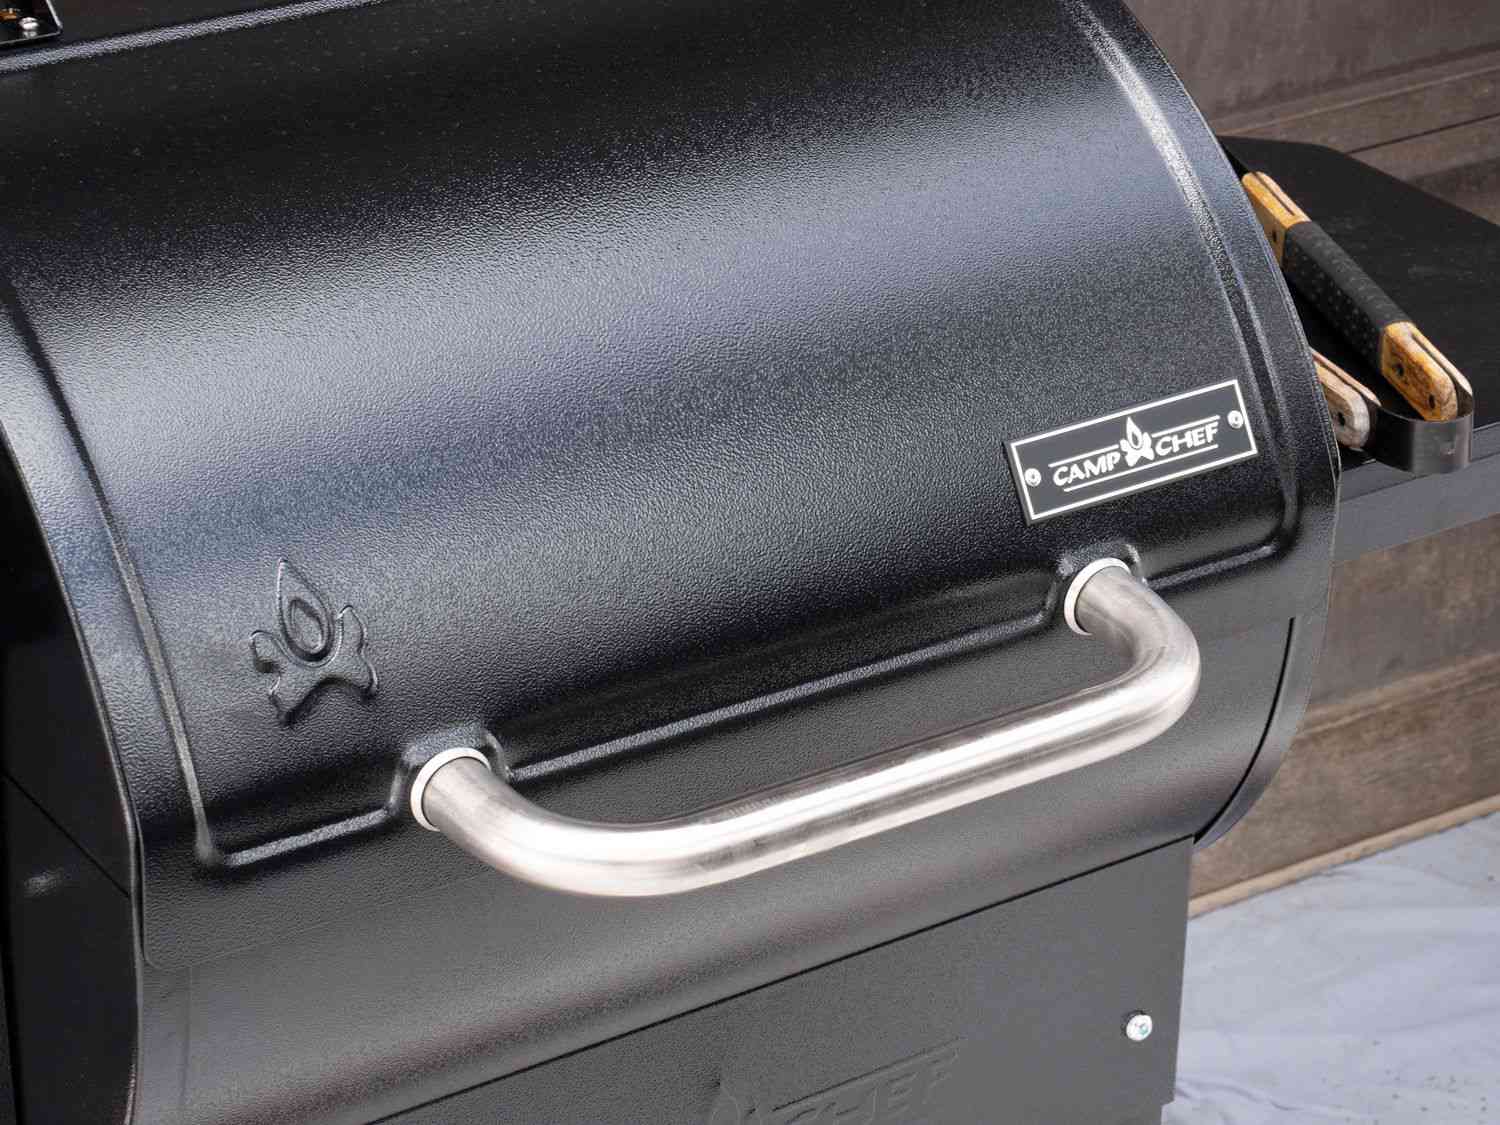 Closed lid of the Camp Chef SmokePro DLX Pellet Grill